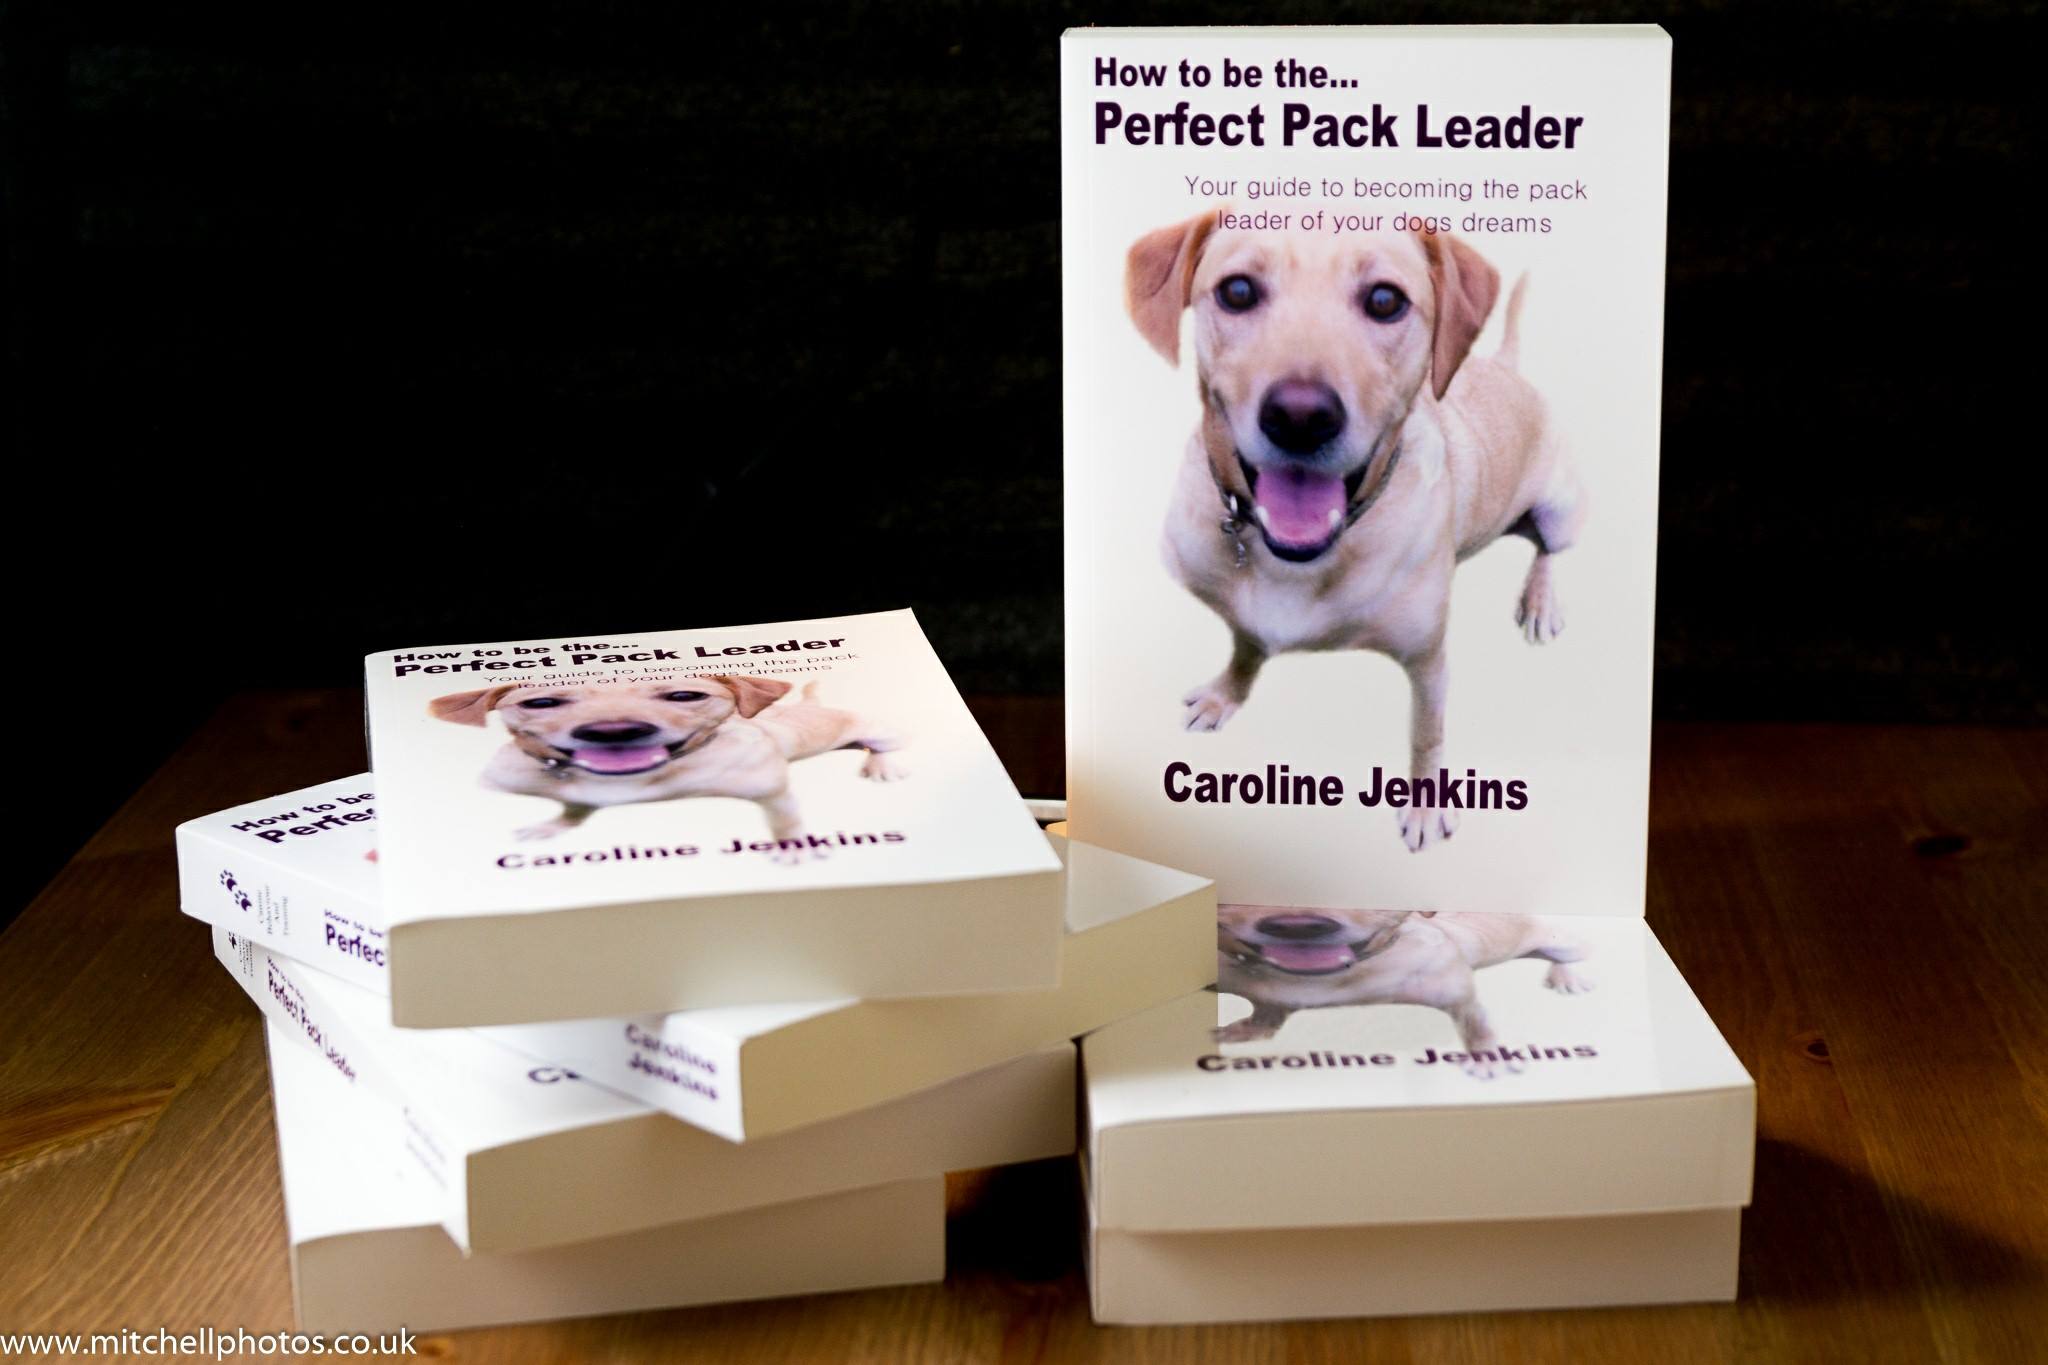 How to be the Perfect Pack Leader by Caroline Jenkins